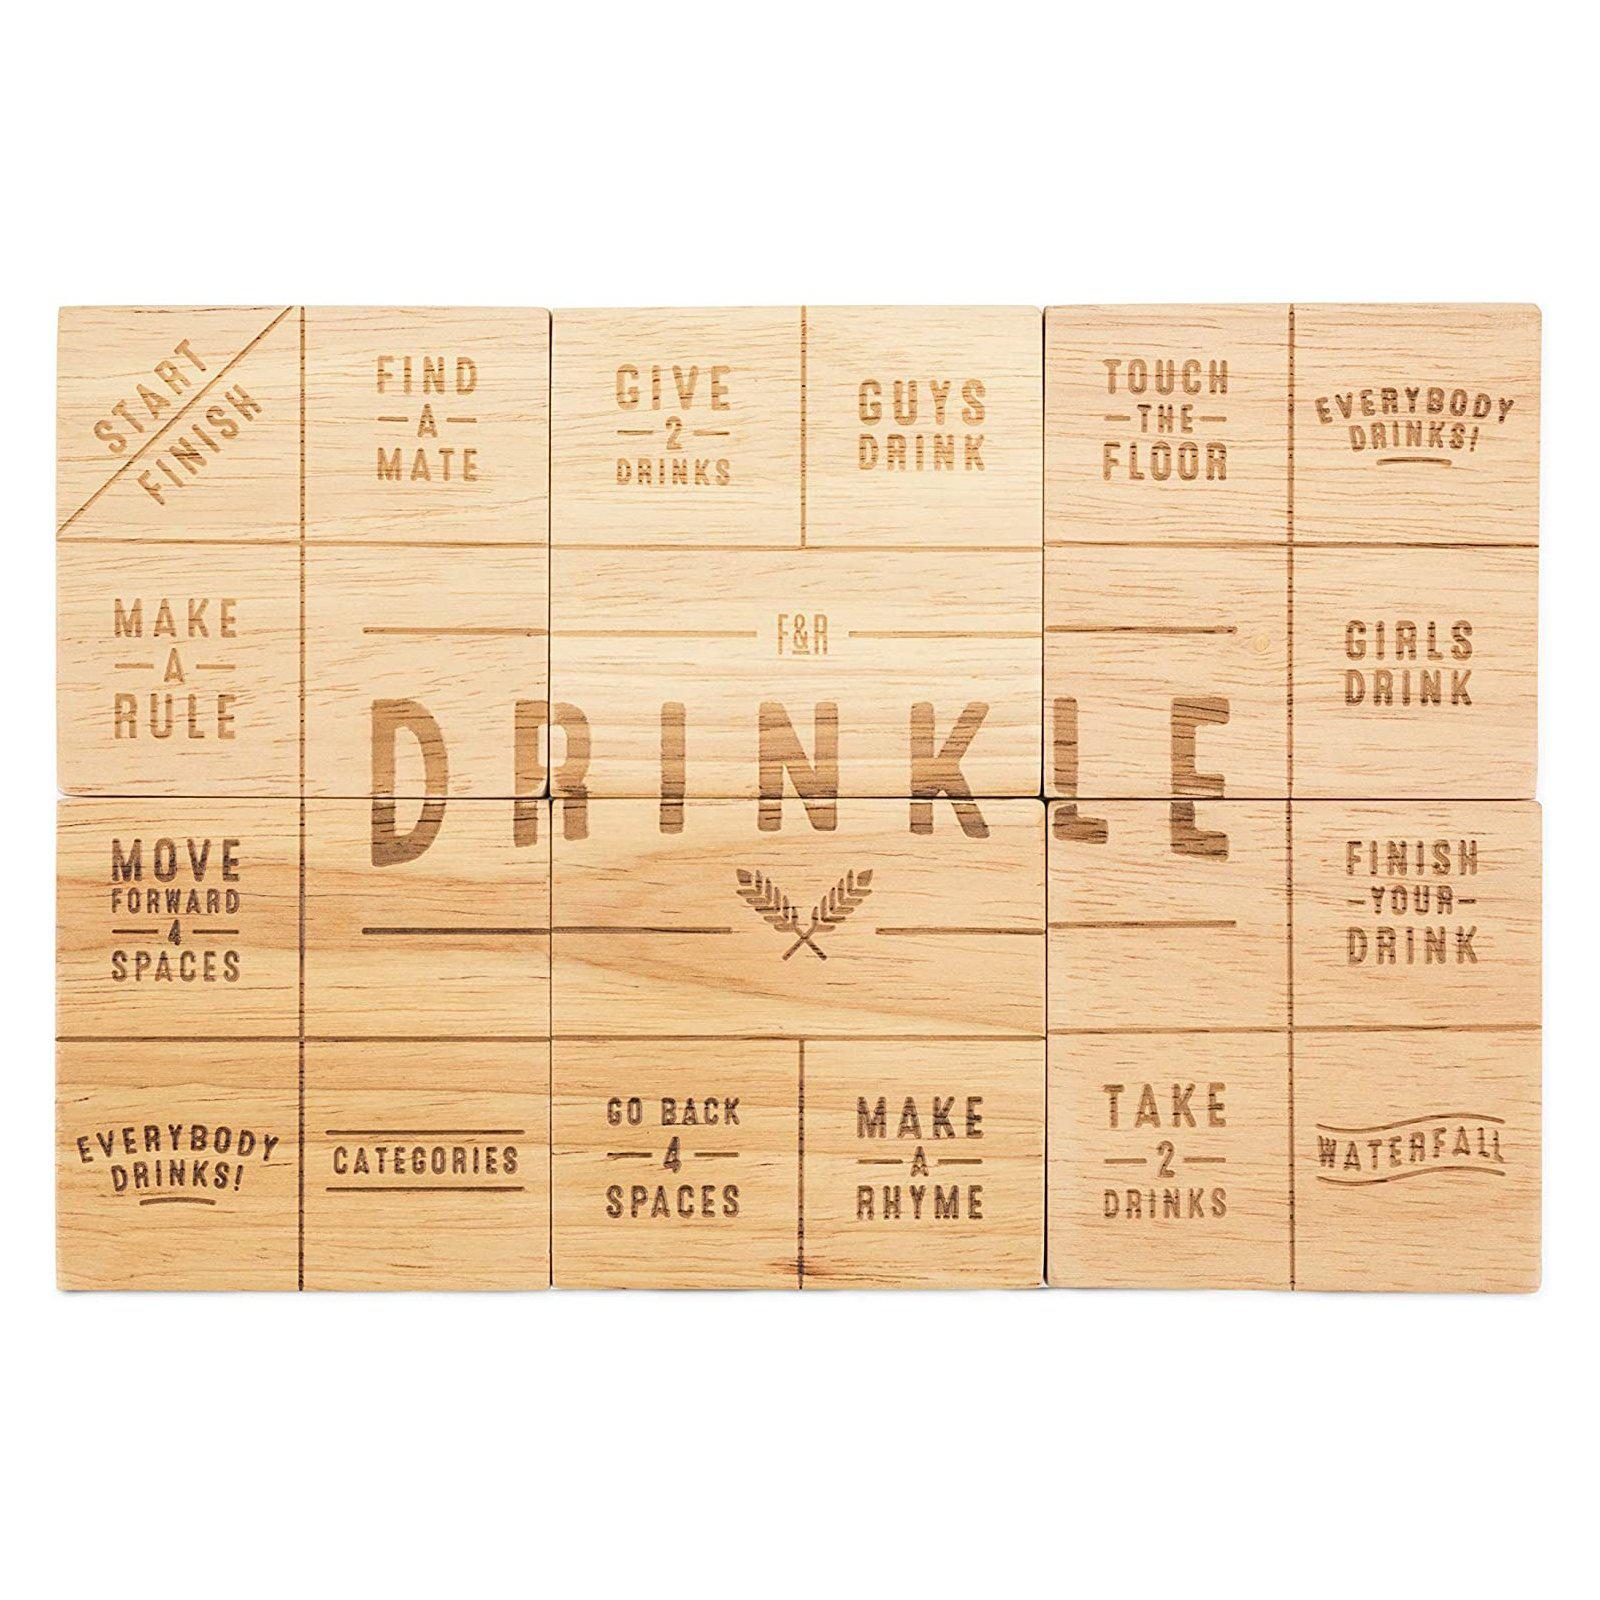 Drinkle Beer Drinking Board Game-Games & Novelty-Foster & Rye-The Bay Room